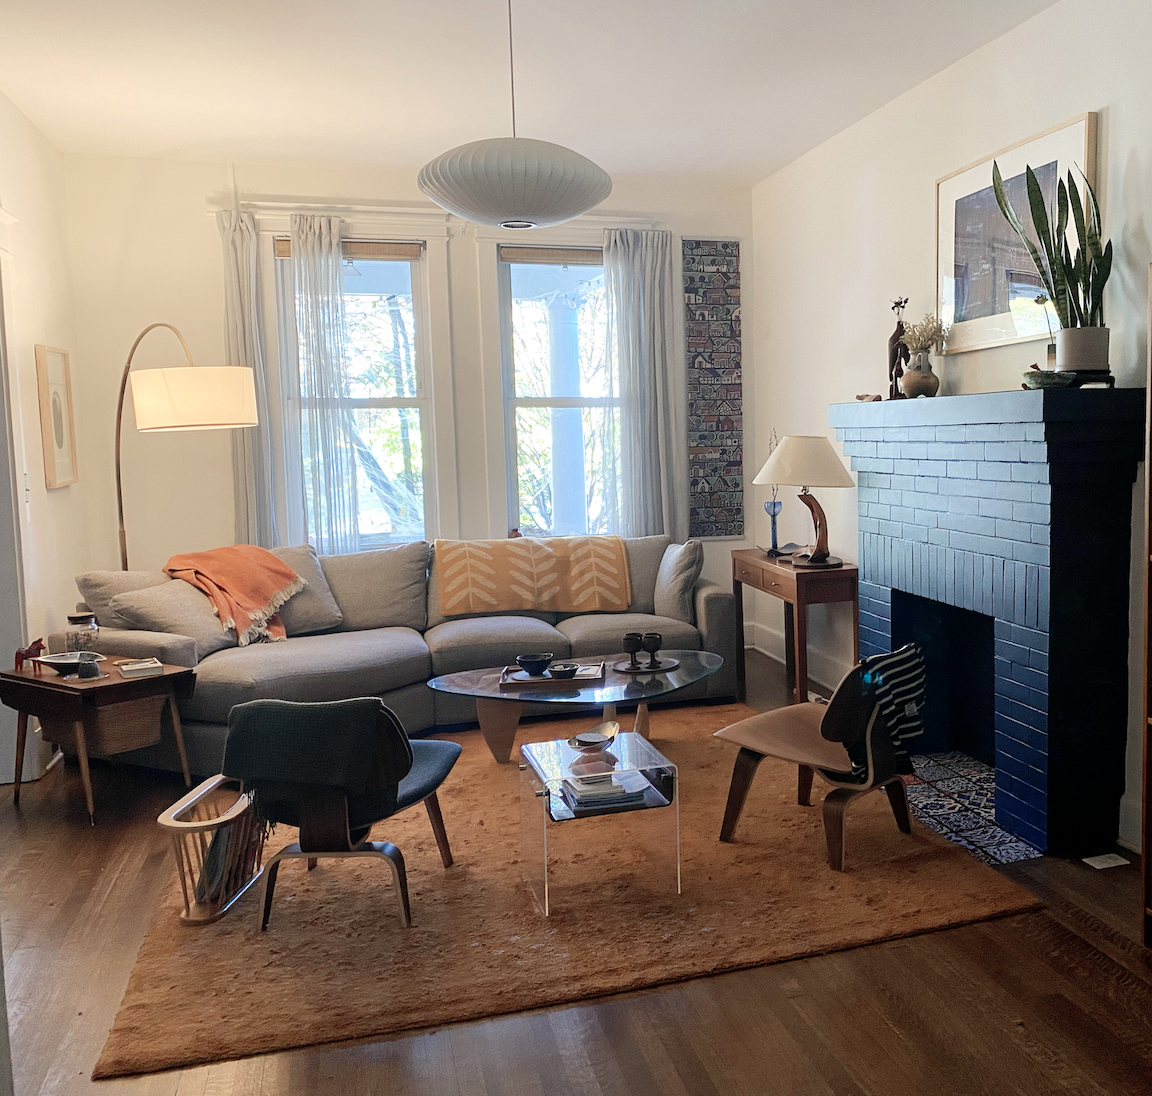 This 16th Street Heights Rowhouse Is Filled With Original Art, Estate Sale Finds, and Historical Details